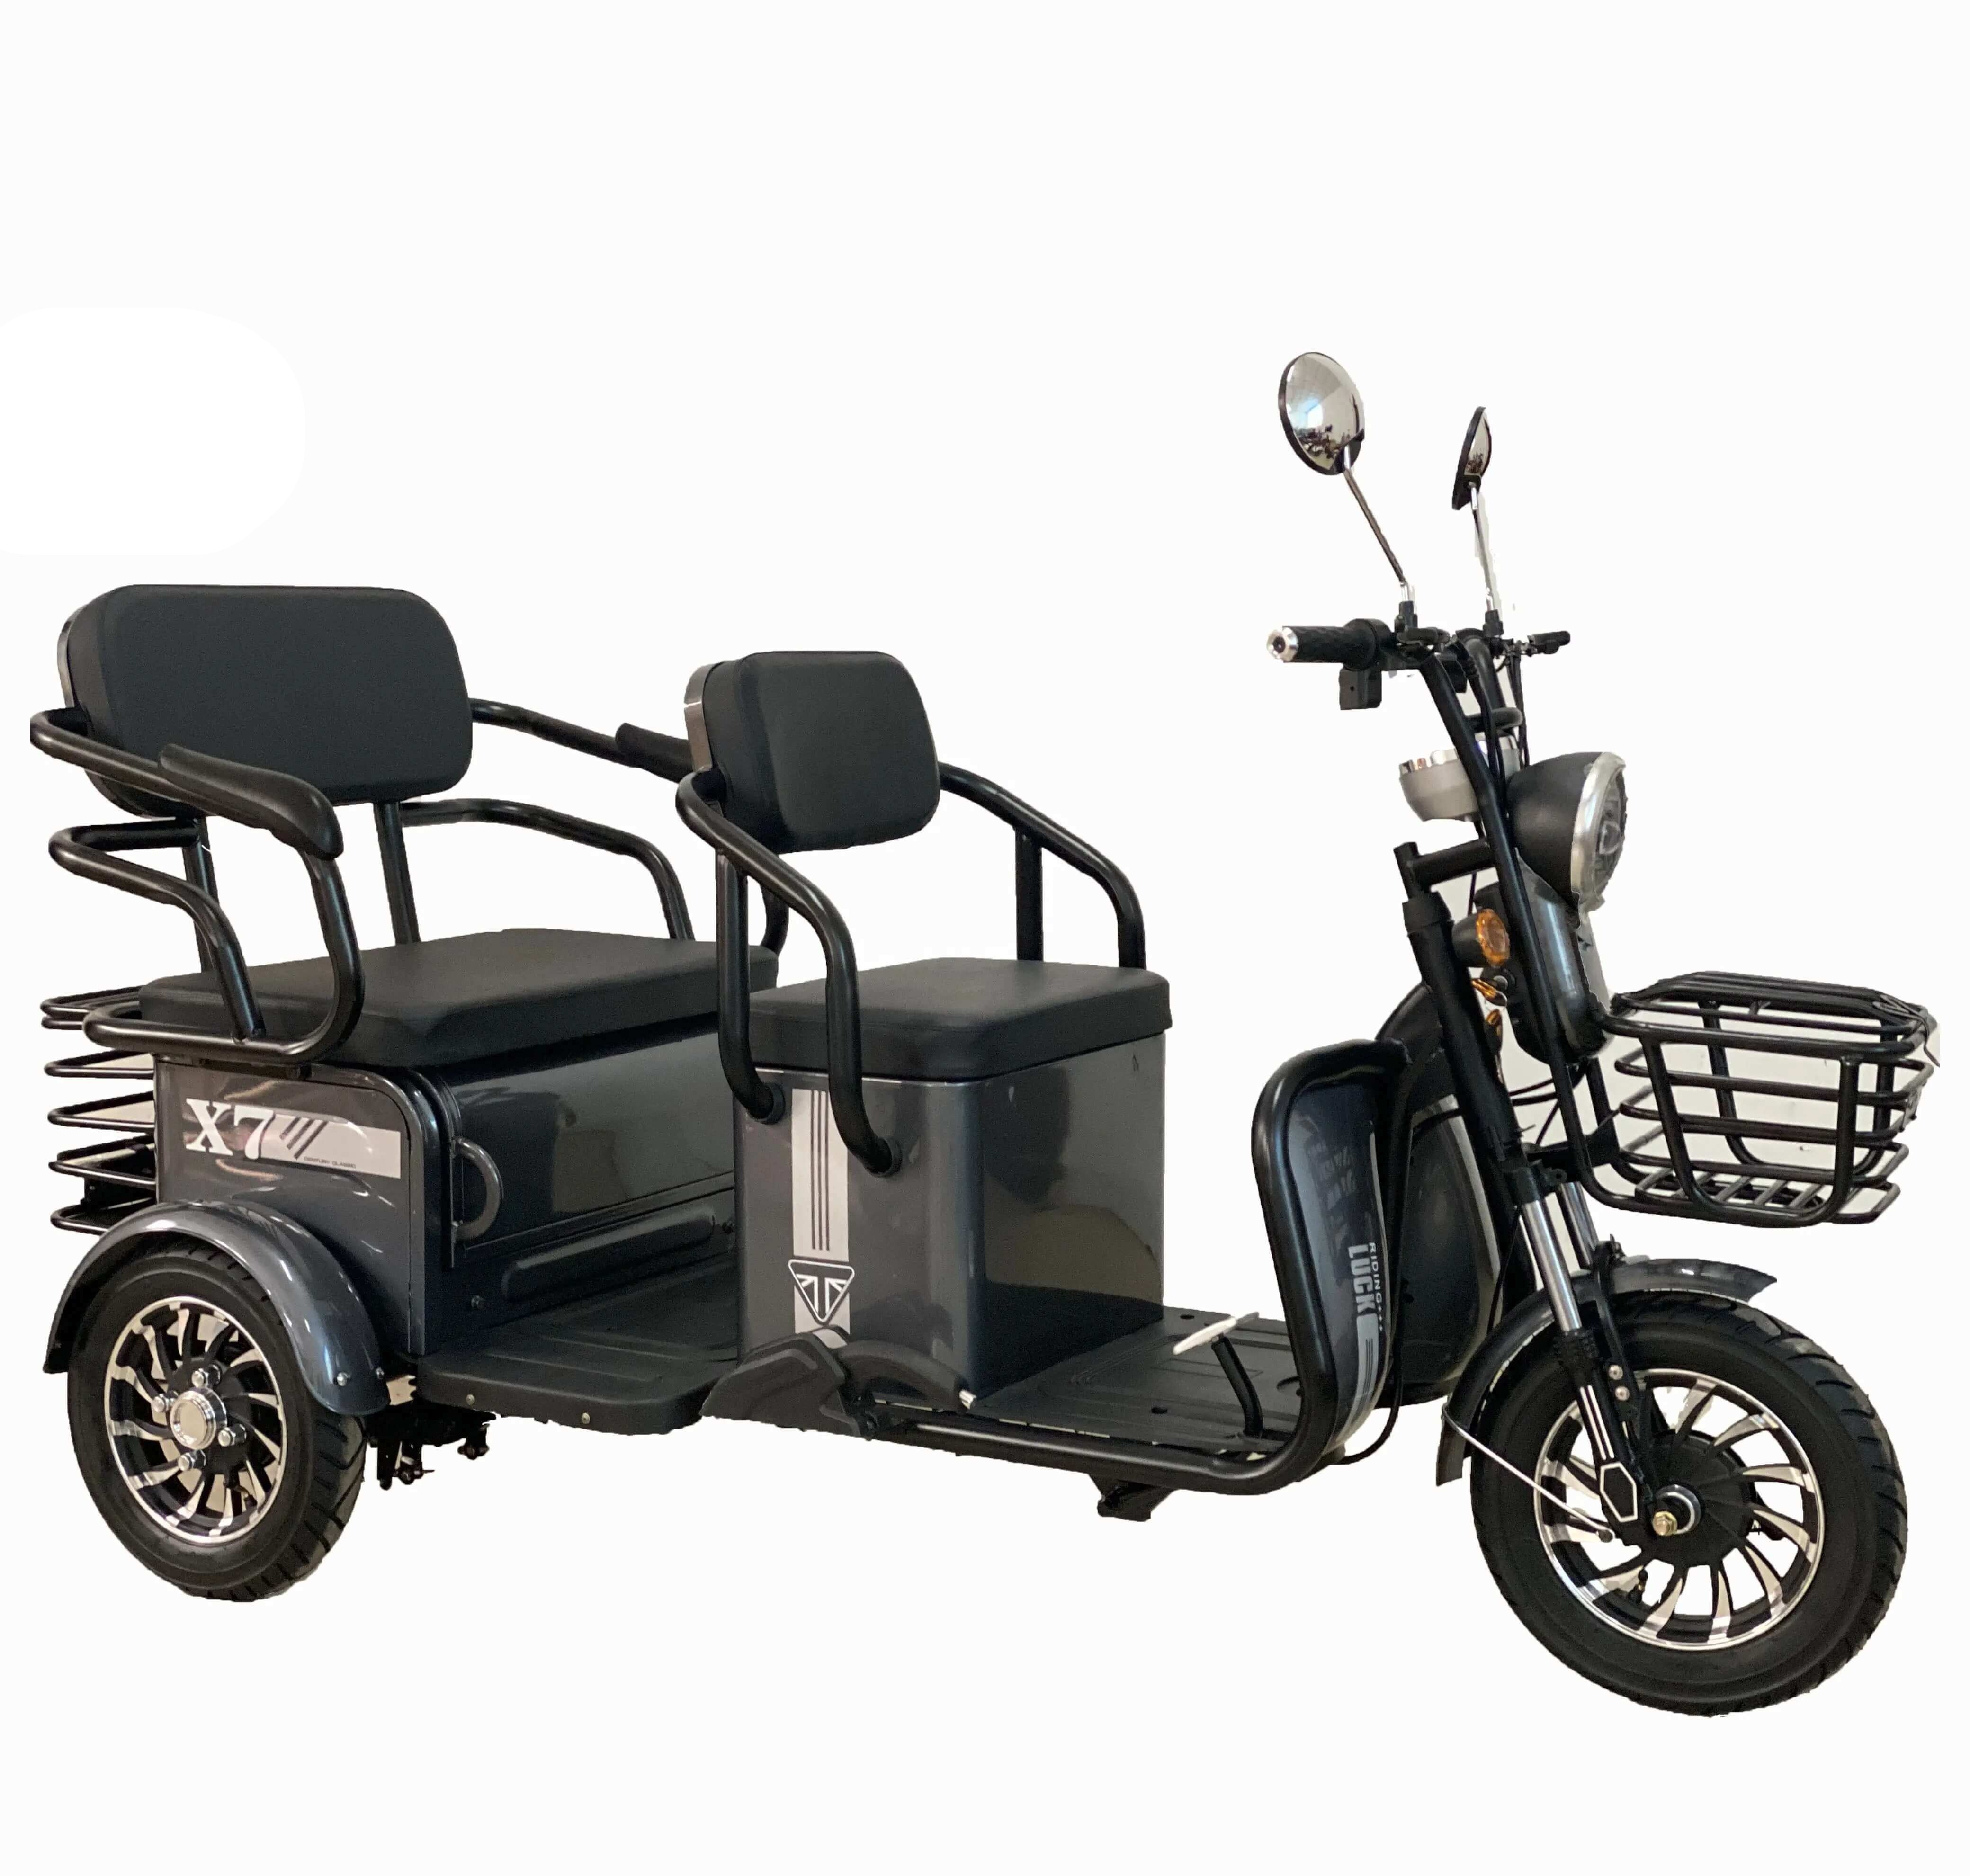 Megawheels Mobility 3 Wheel 3 passenger Electric Tricycle Scooter- black